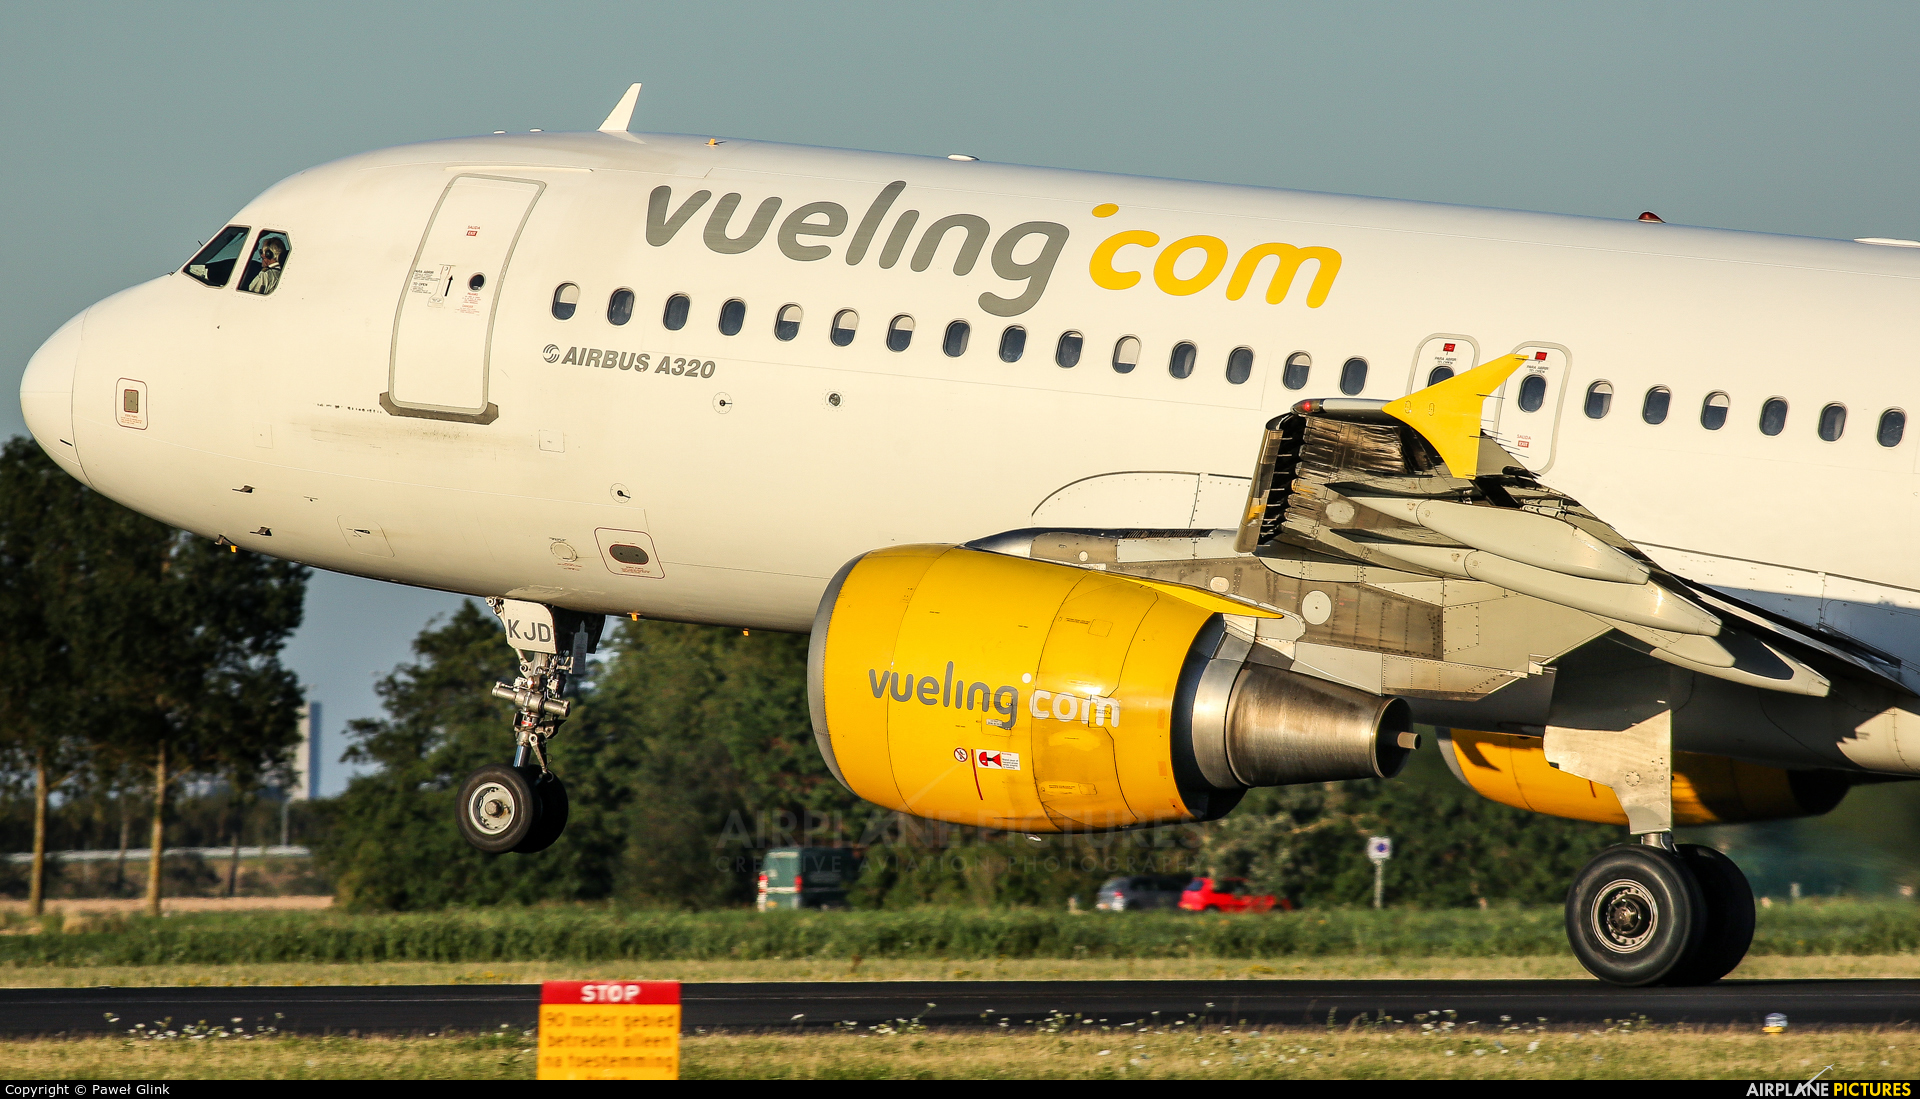 Vueling Airlines EC-KJD aircraft at Amsterdam - Schiphol